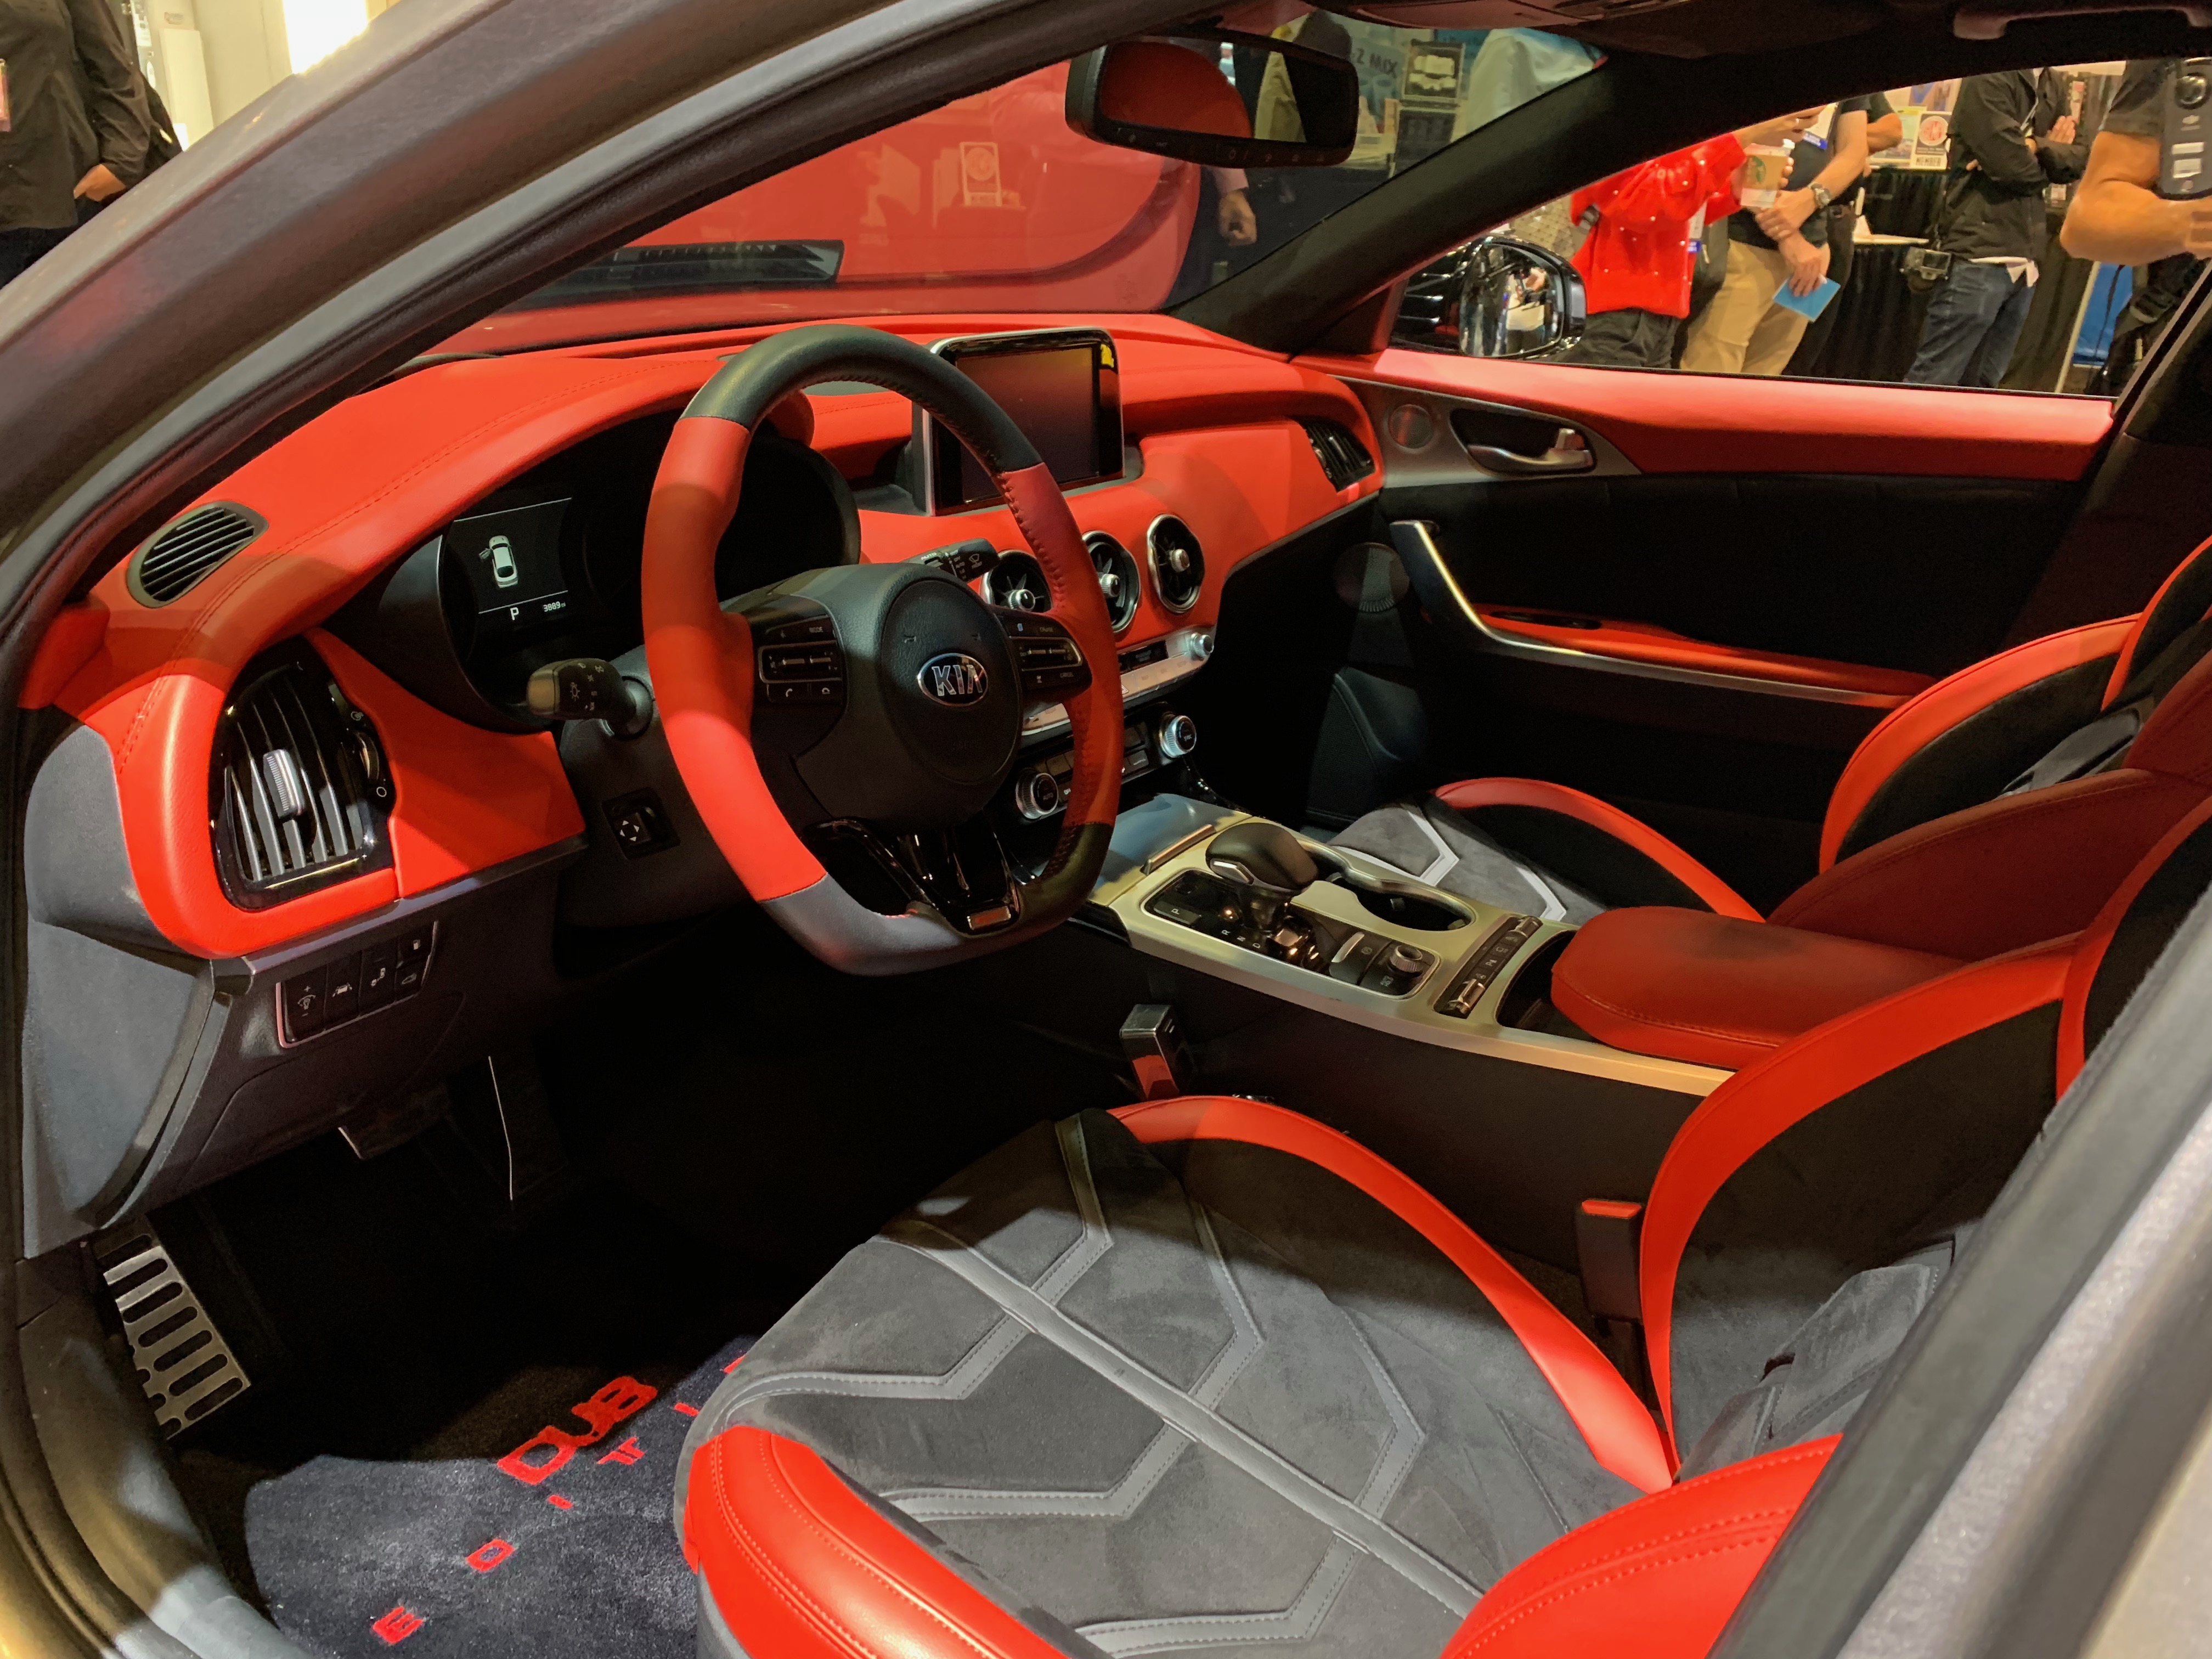 If you're going to customized an interior, you might as well go all the way. | Carter Nacke photo